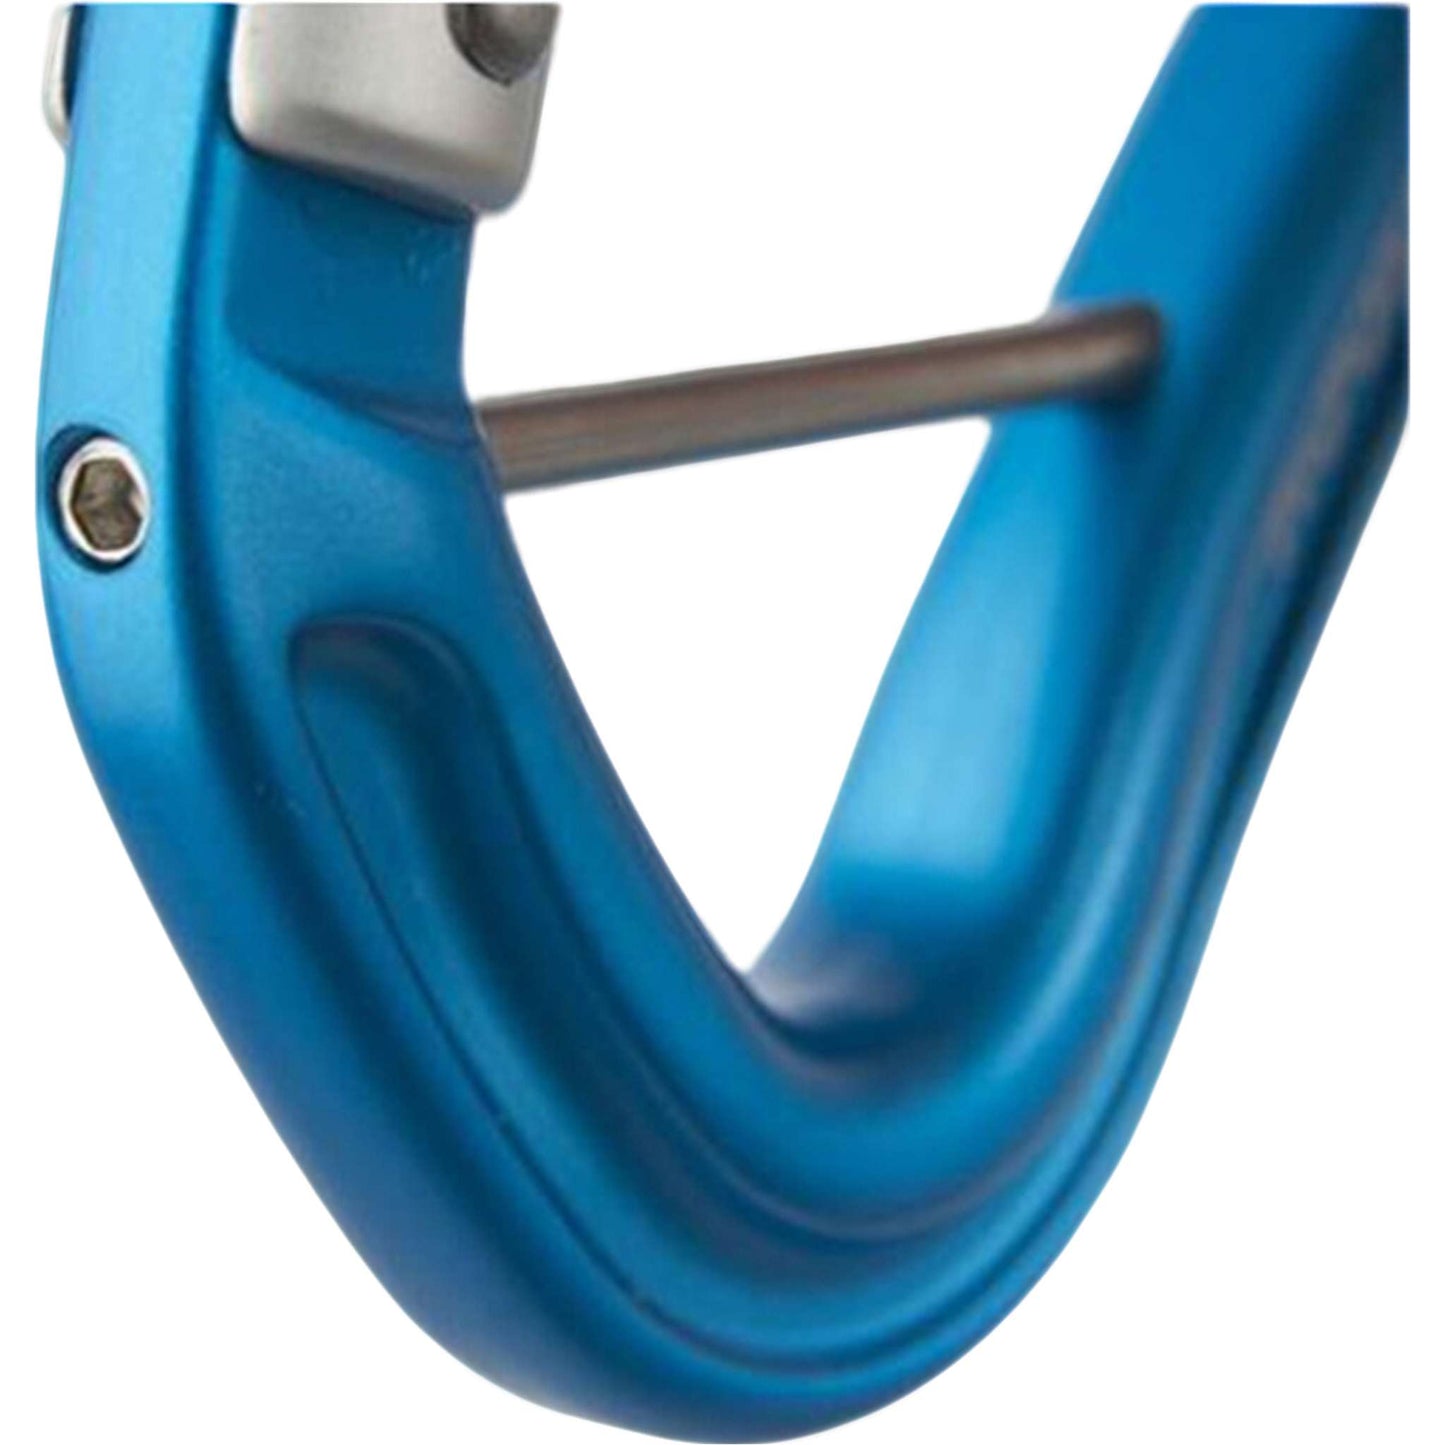 Hector BC Triple Lock HMS Carabiner - Versatile, High-Strength, Pear-Shaped for Climbing & Anchoring